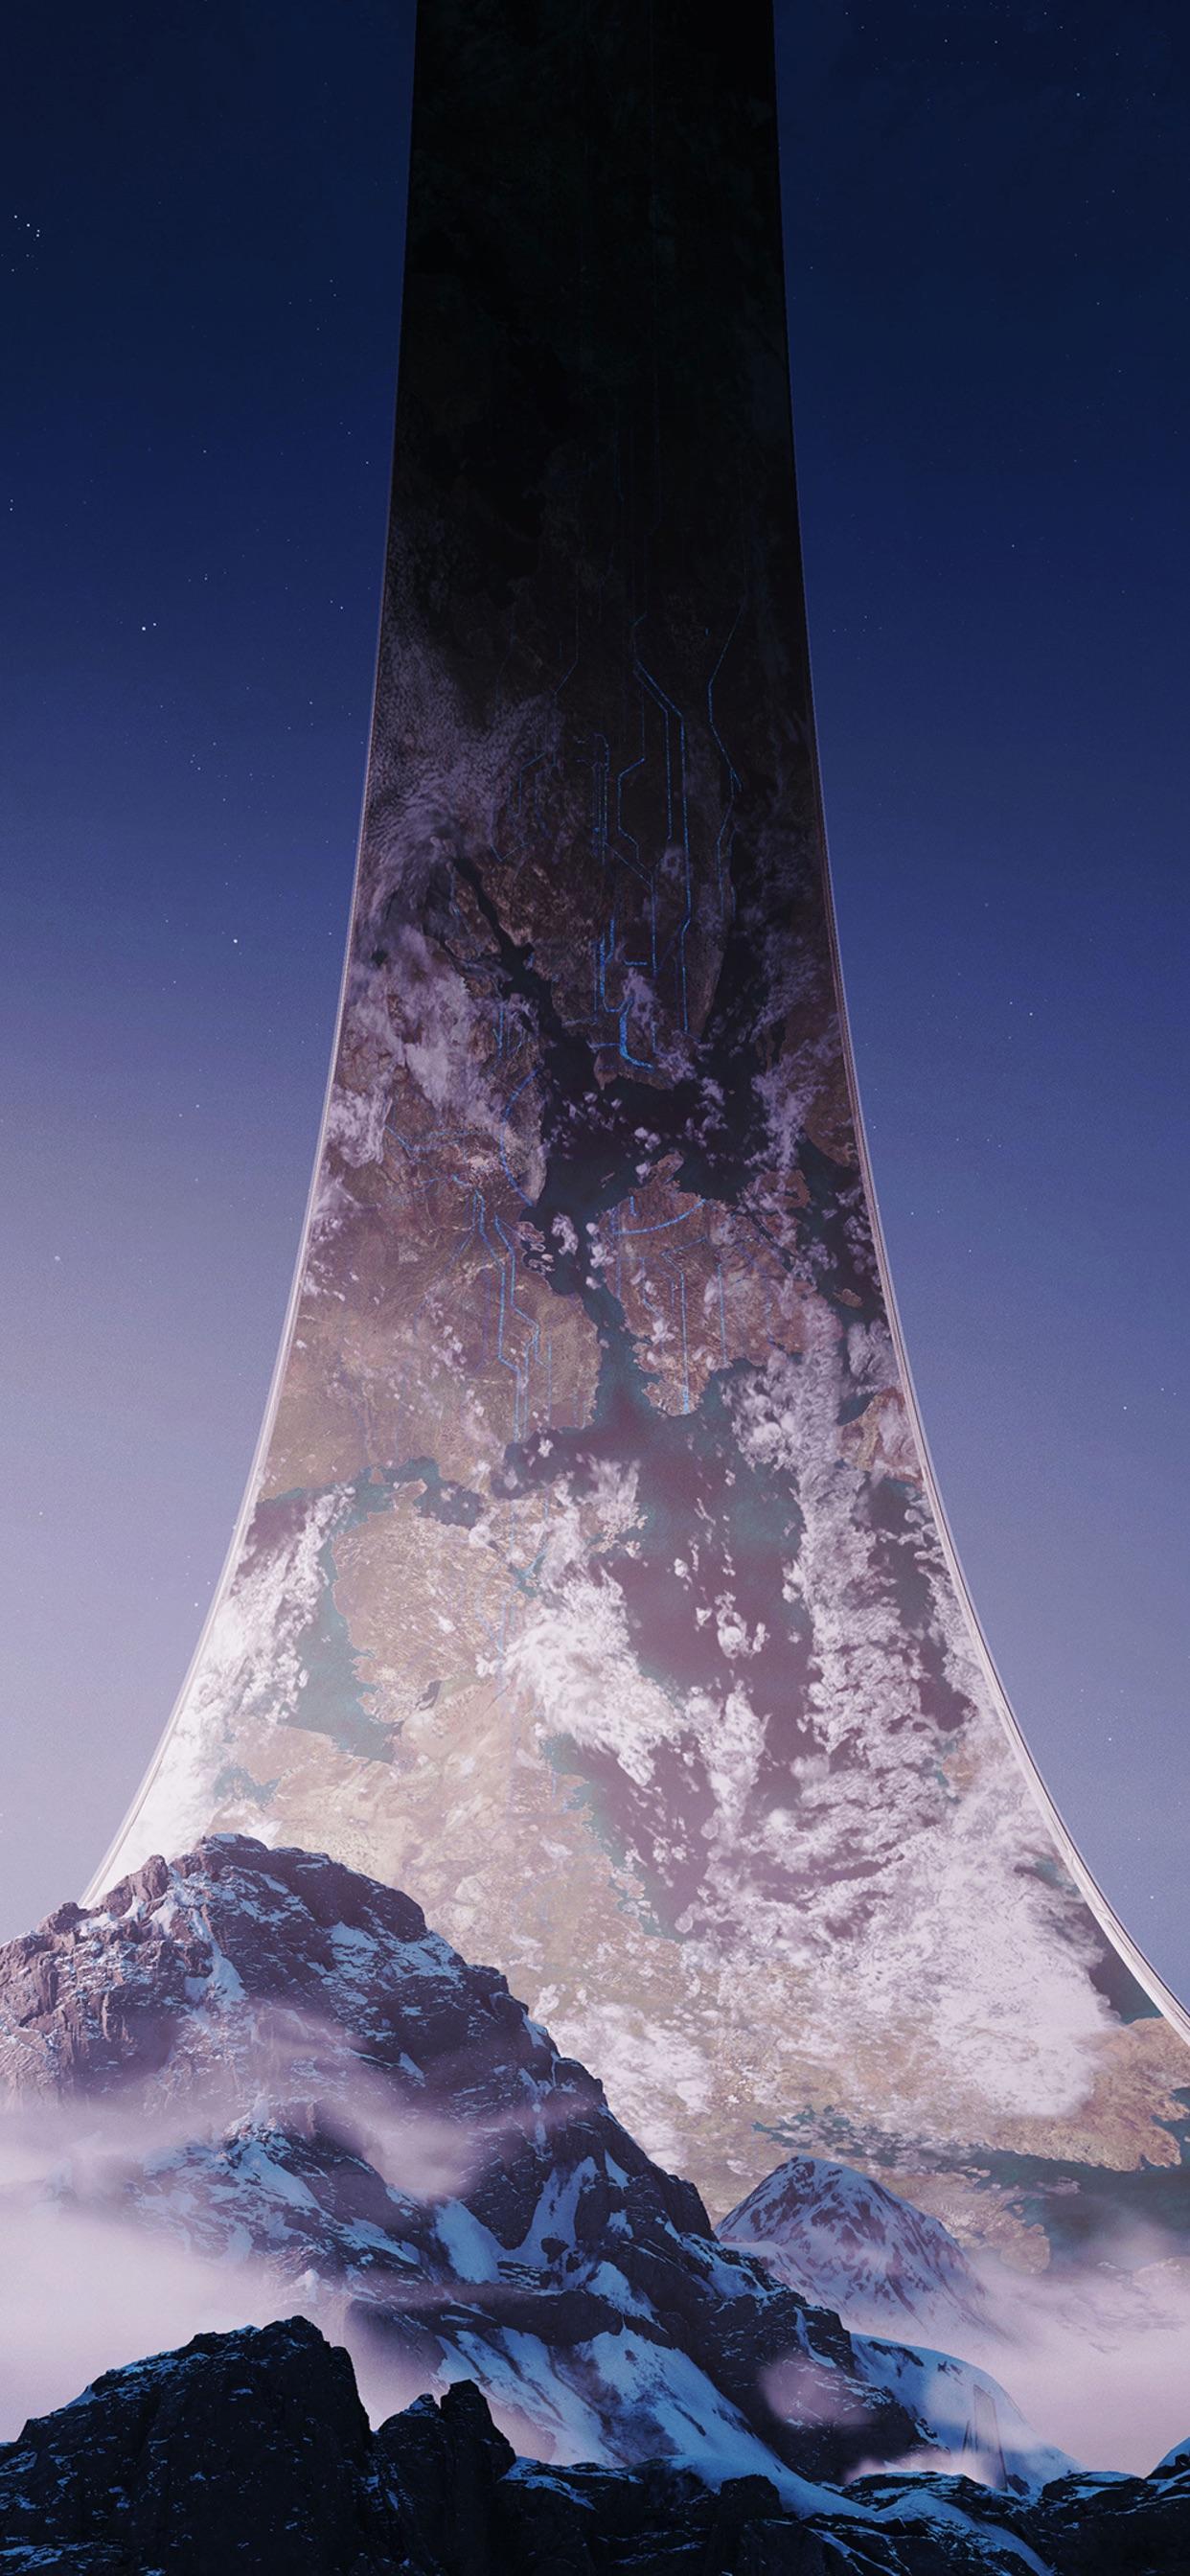 Looking for neat Halo wallpaper for the iPhone XS Max 1242x2688